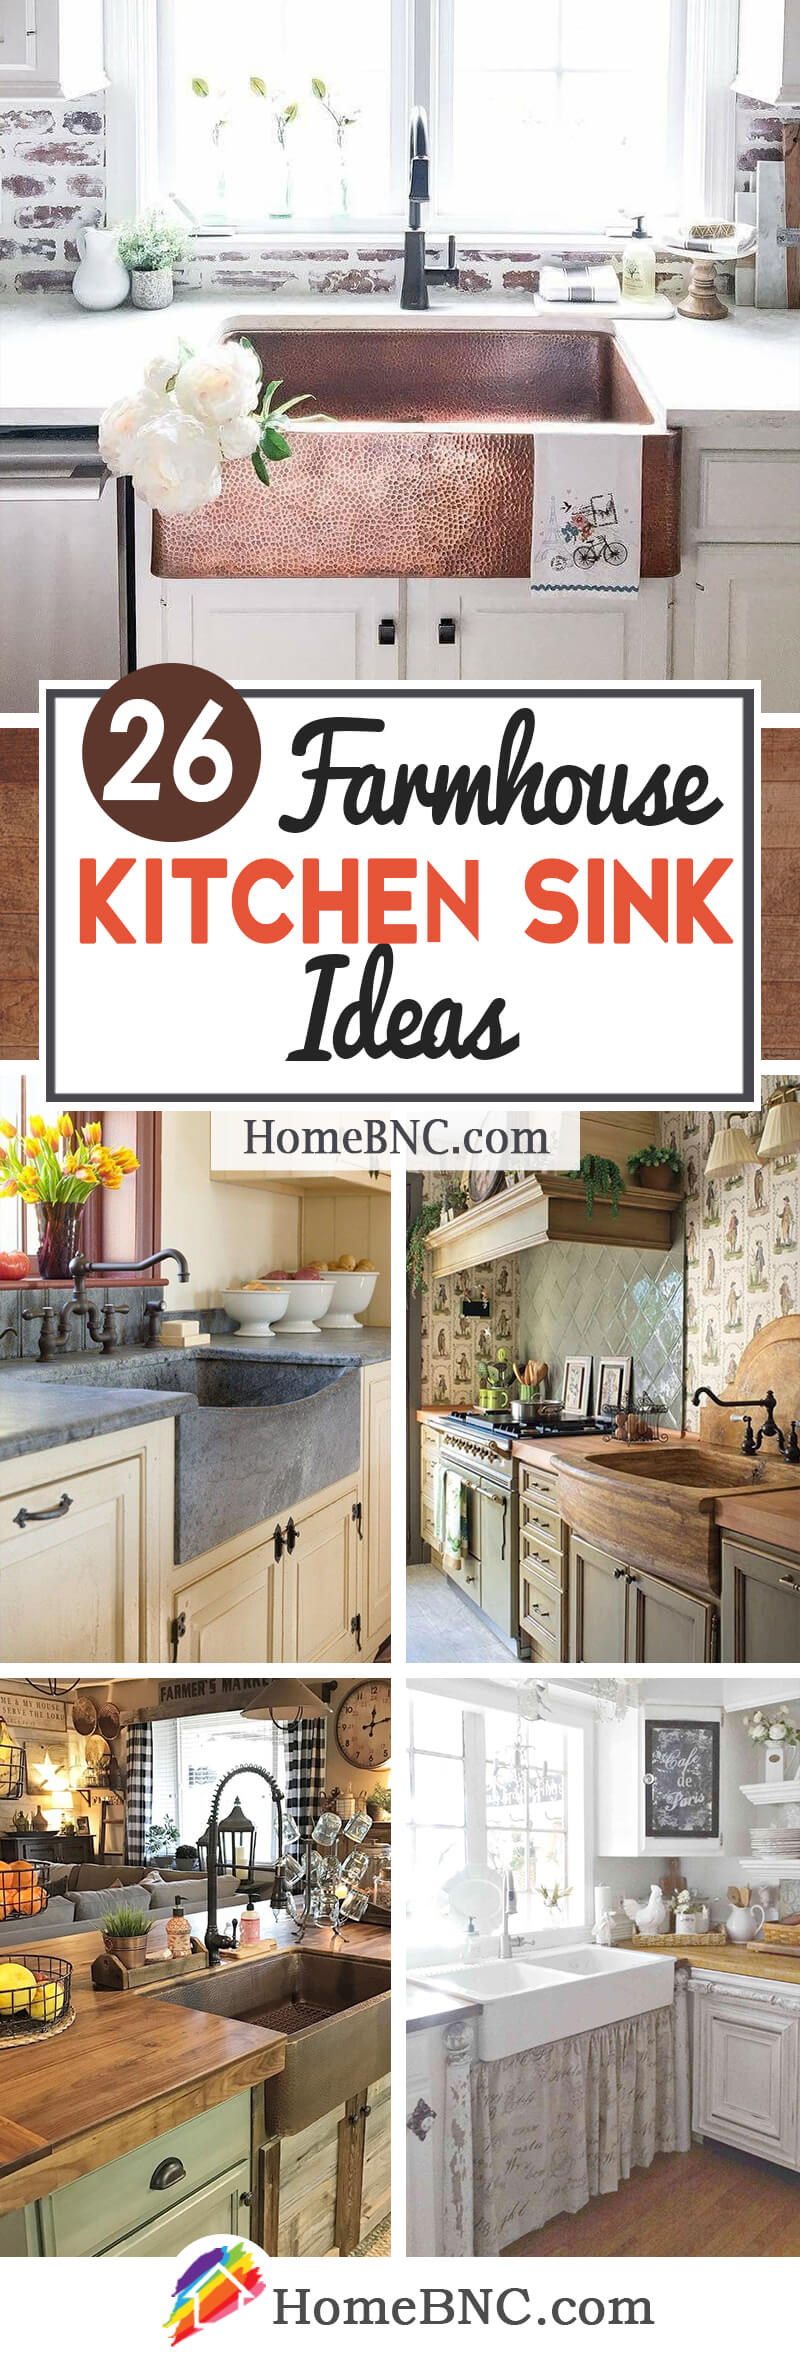 18 Farmhouse Kitchen Sink Ideas and Designs for 18